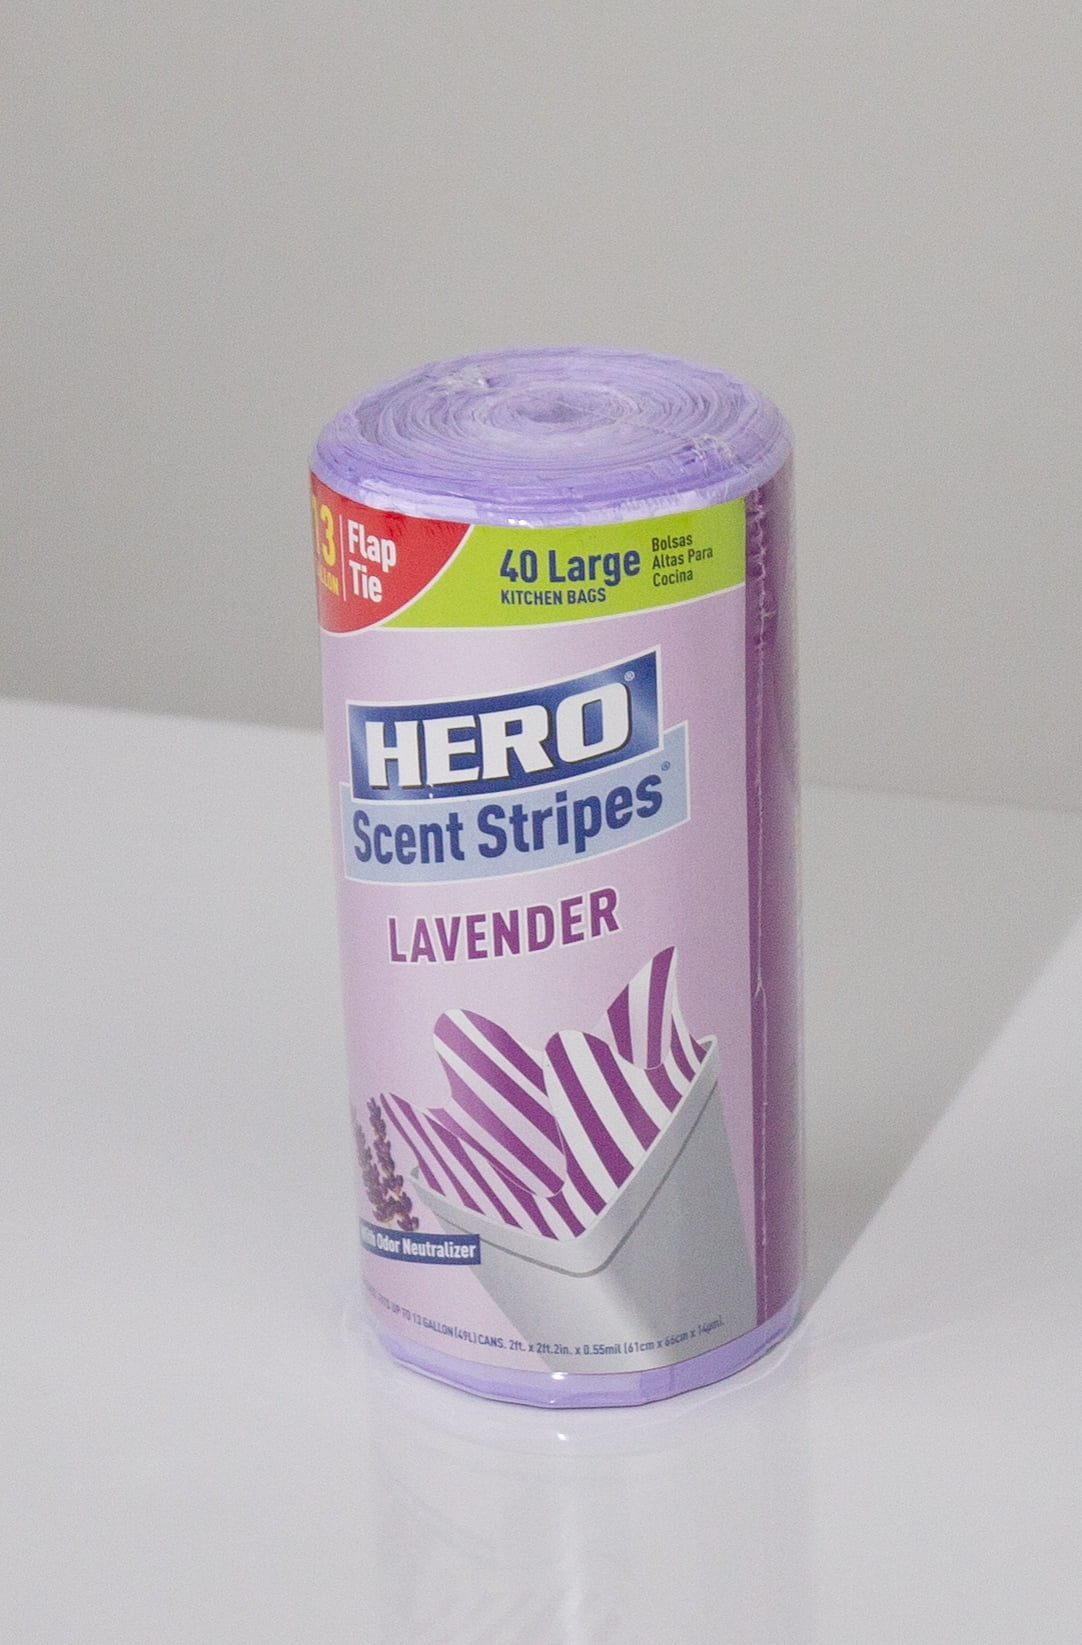 Hero Small Trash Bags, 4 Gallon, 40 Bags (Lavender Scent), Odor Neutralizer, Flap Ties